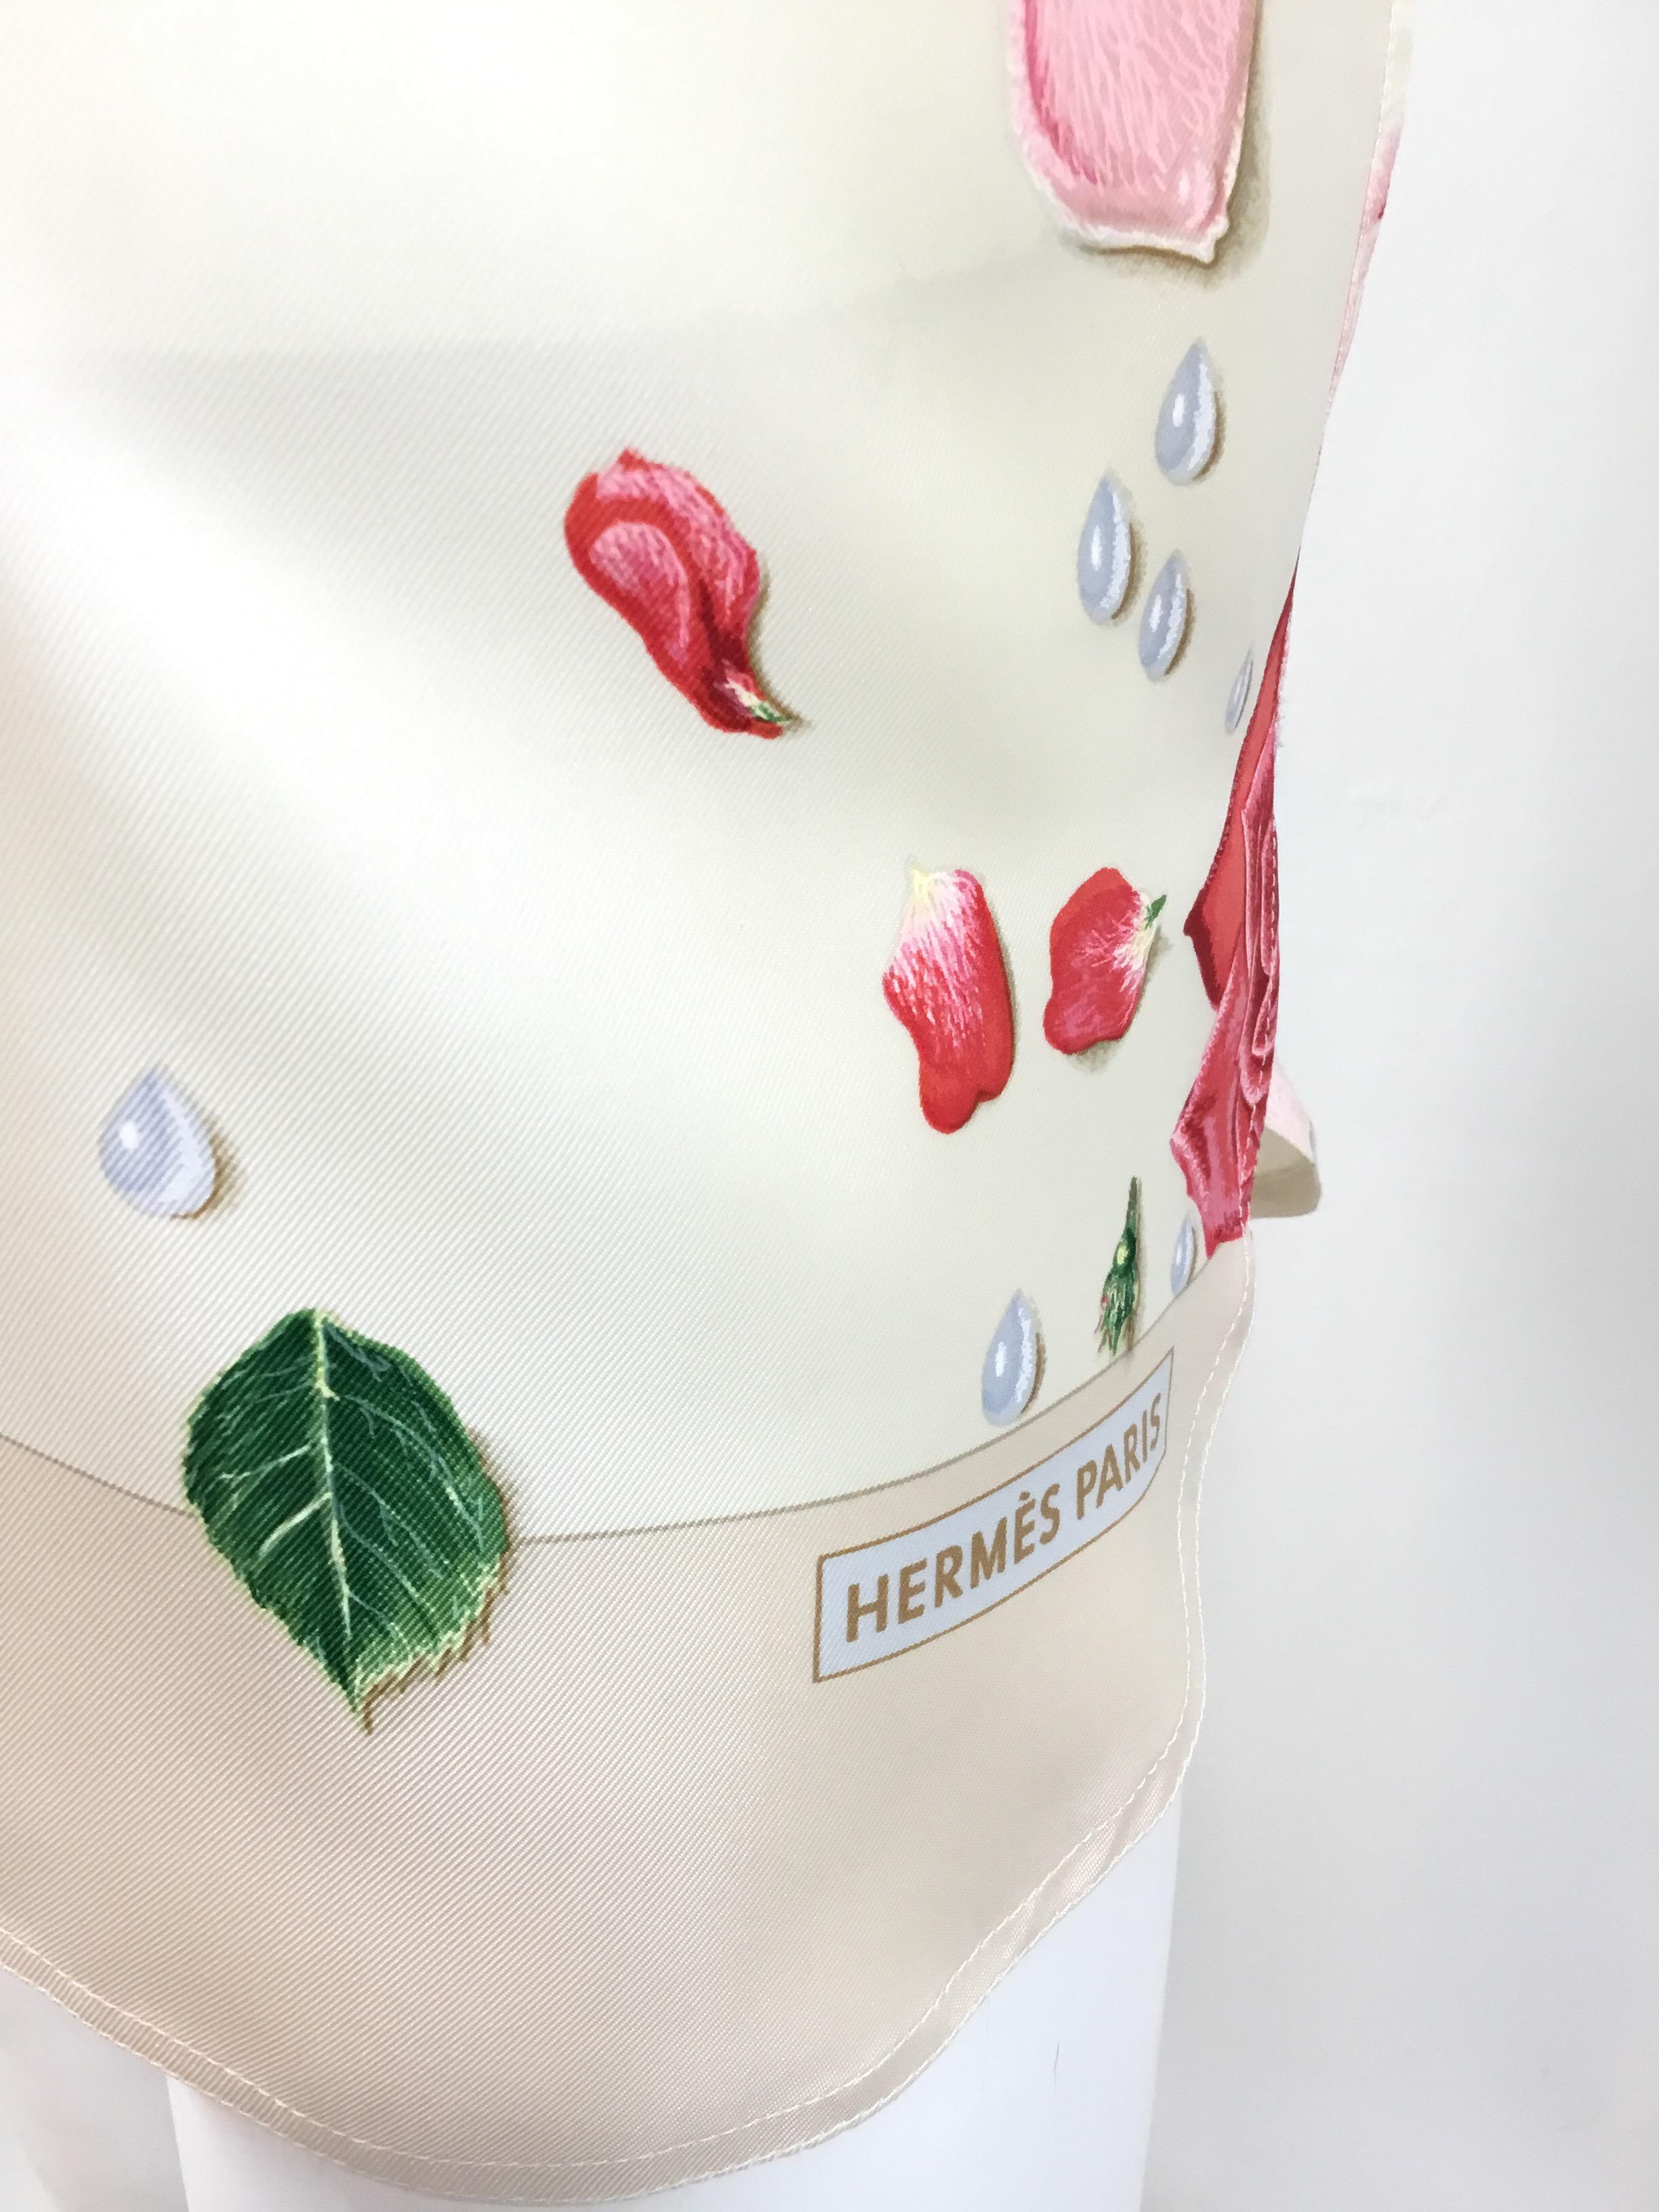 Hermes floral silk blouse on an ivory-colored background with button closures along the front and on the cuffs of the sleeve. Blouse is a size 38, 100% silk, made in France.

Bust 40''
Sleeves 23''
Shoulder to shoulder 17''
Length 31''